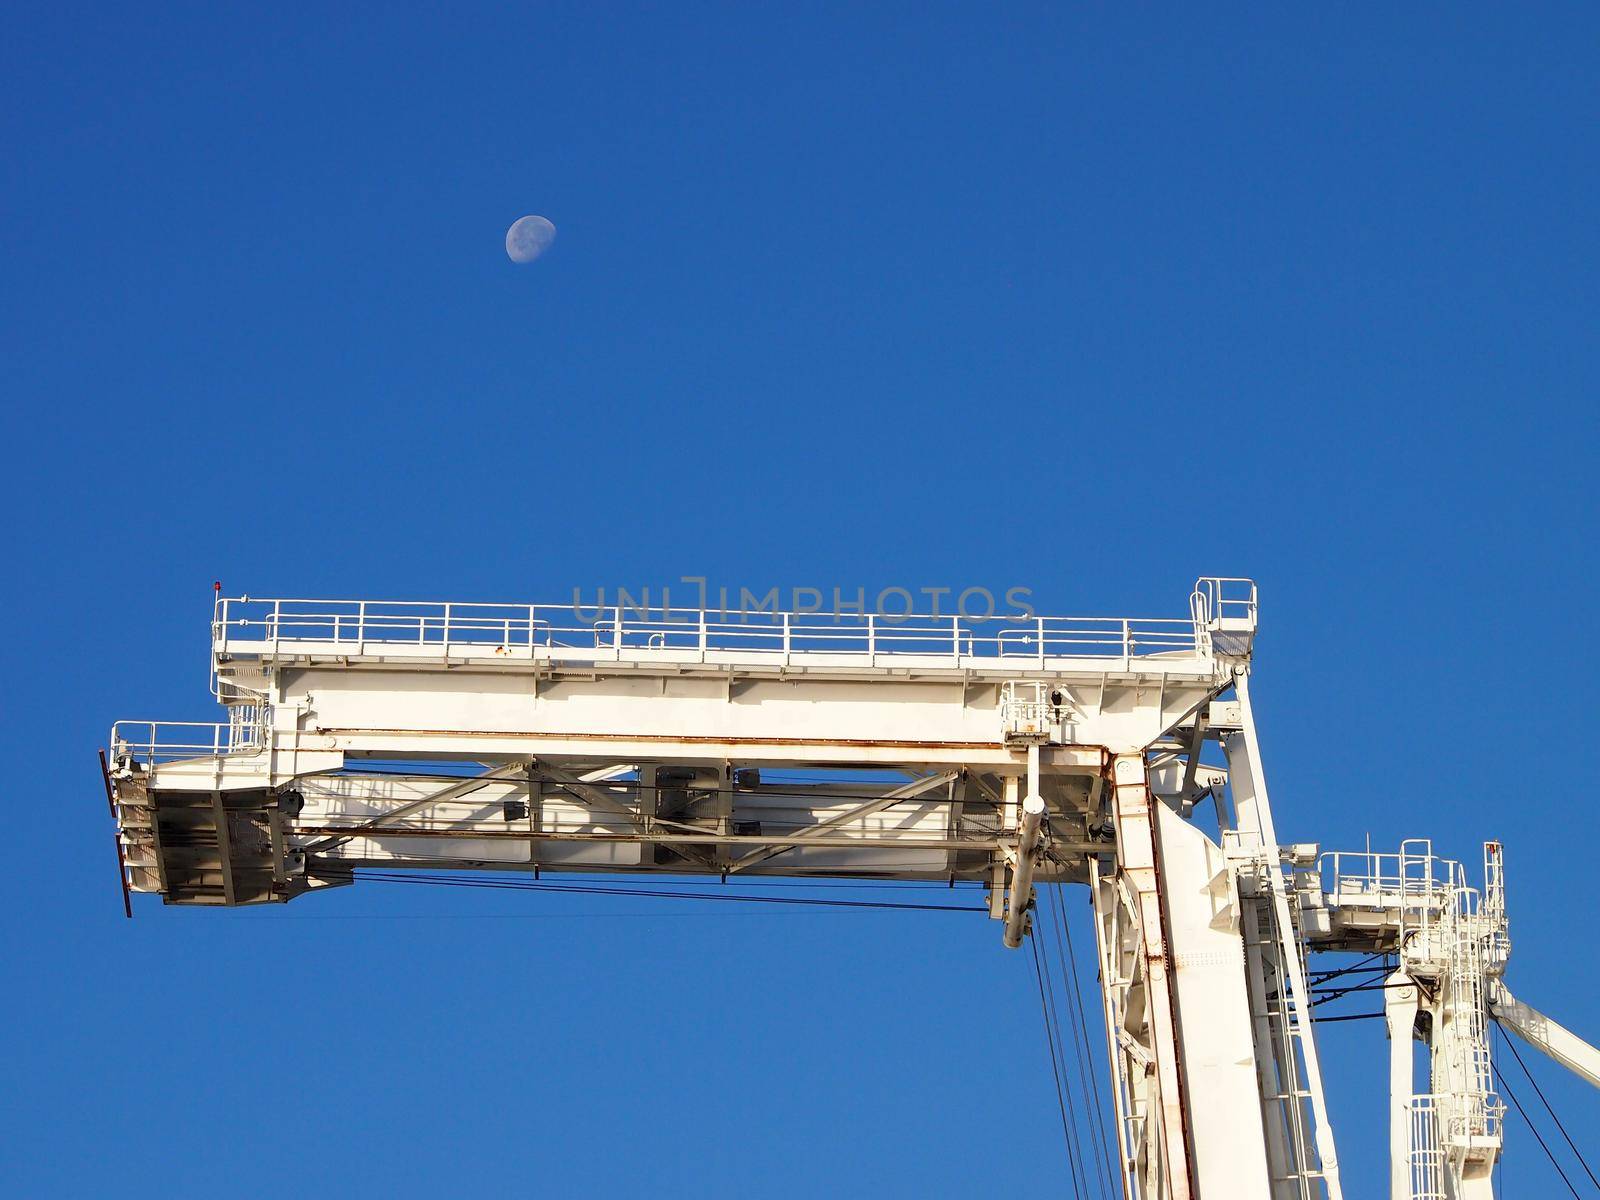 Lifting arm of Large crane with blue sky and half moon by EricGBVD